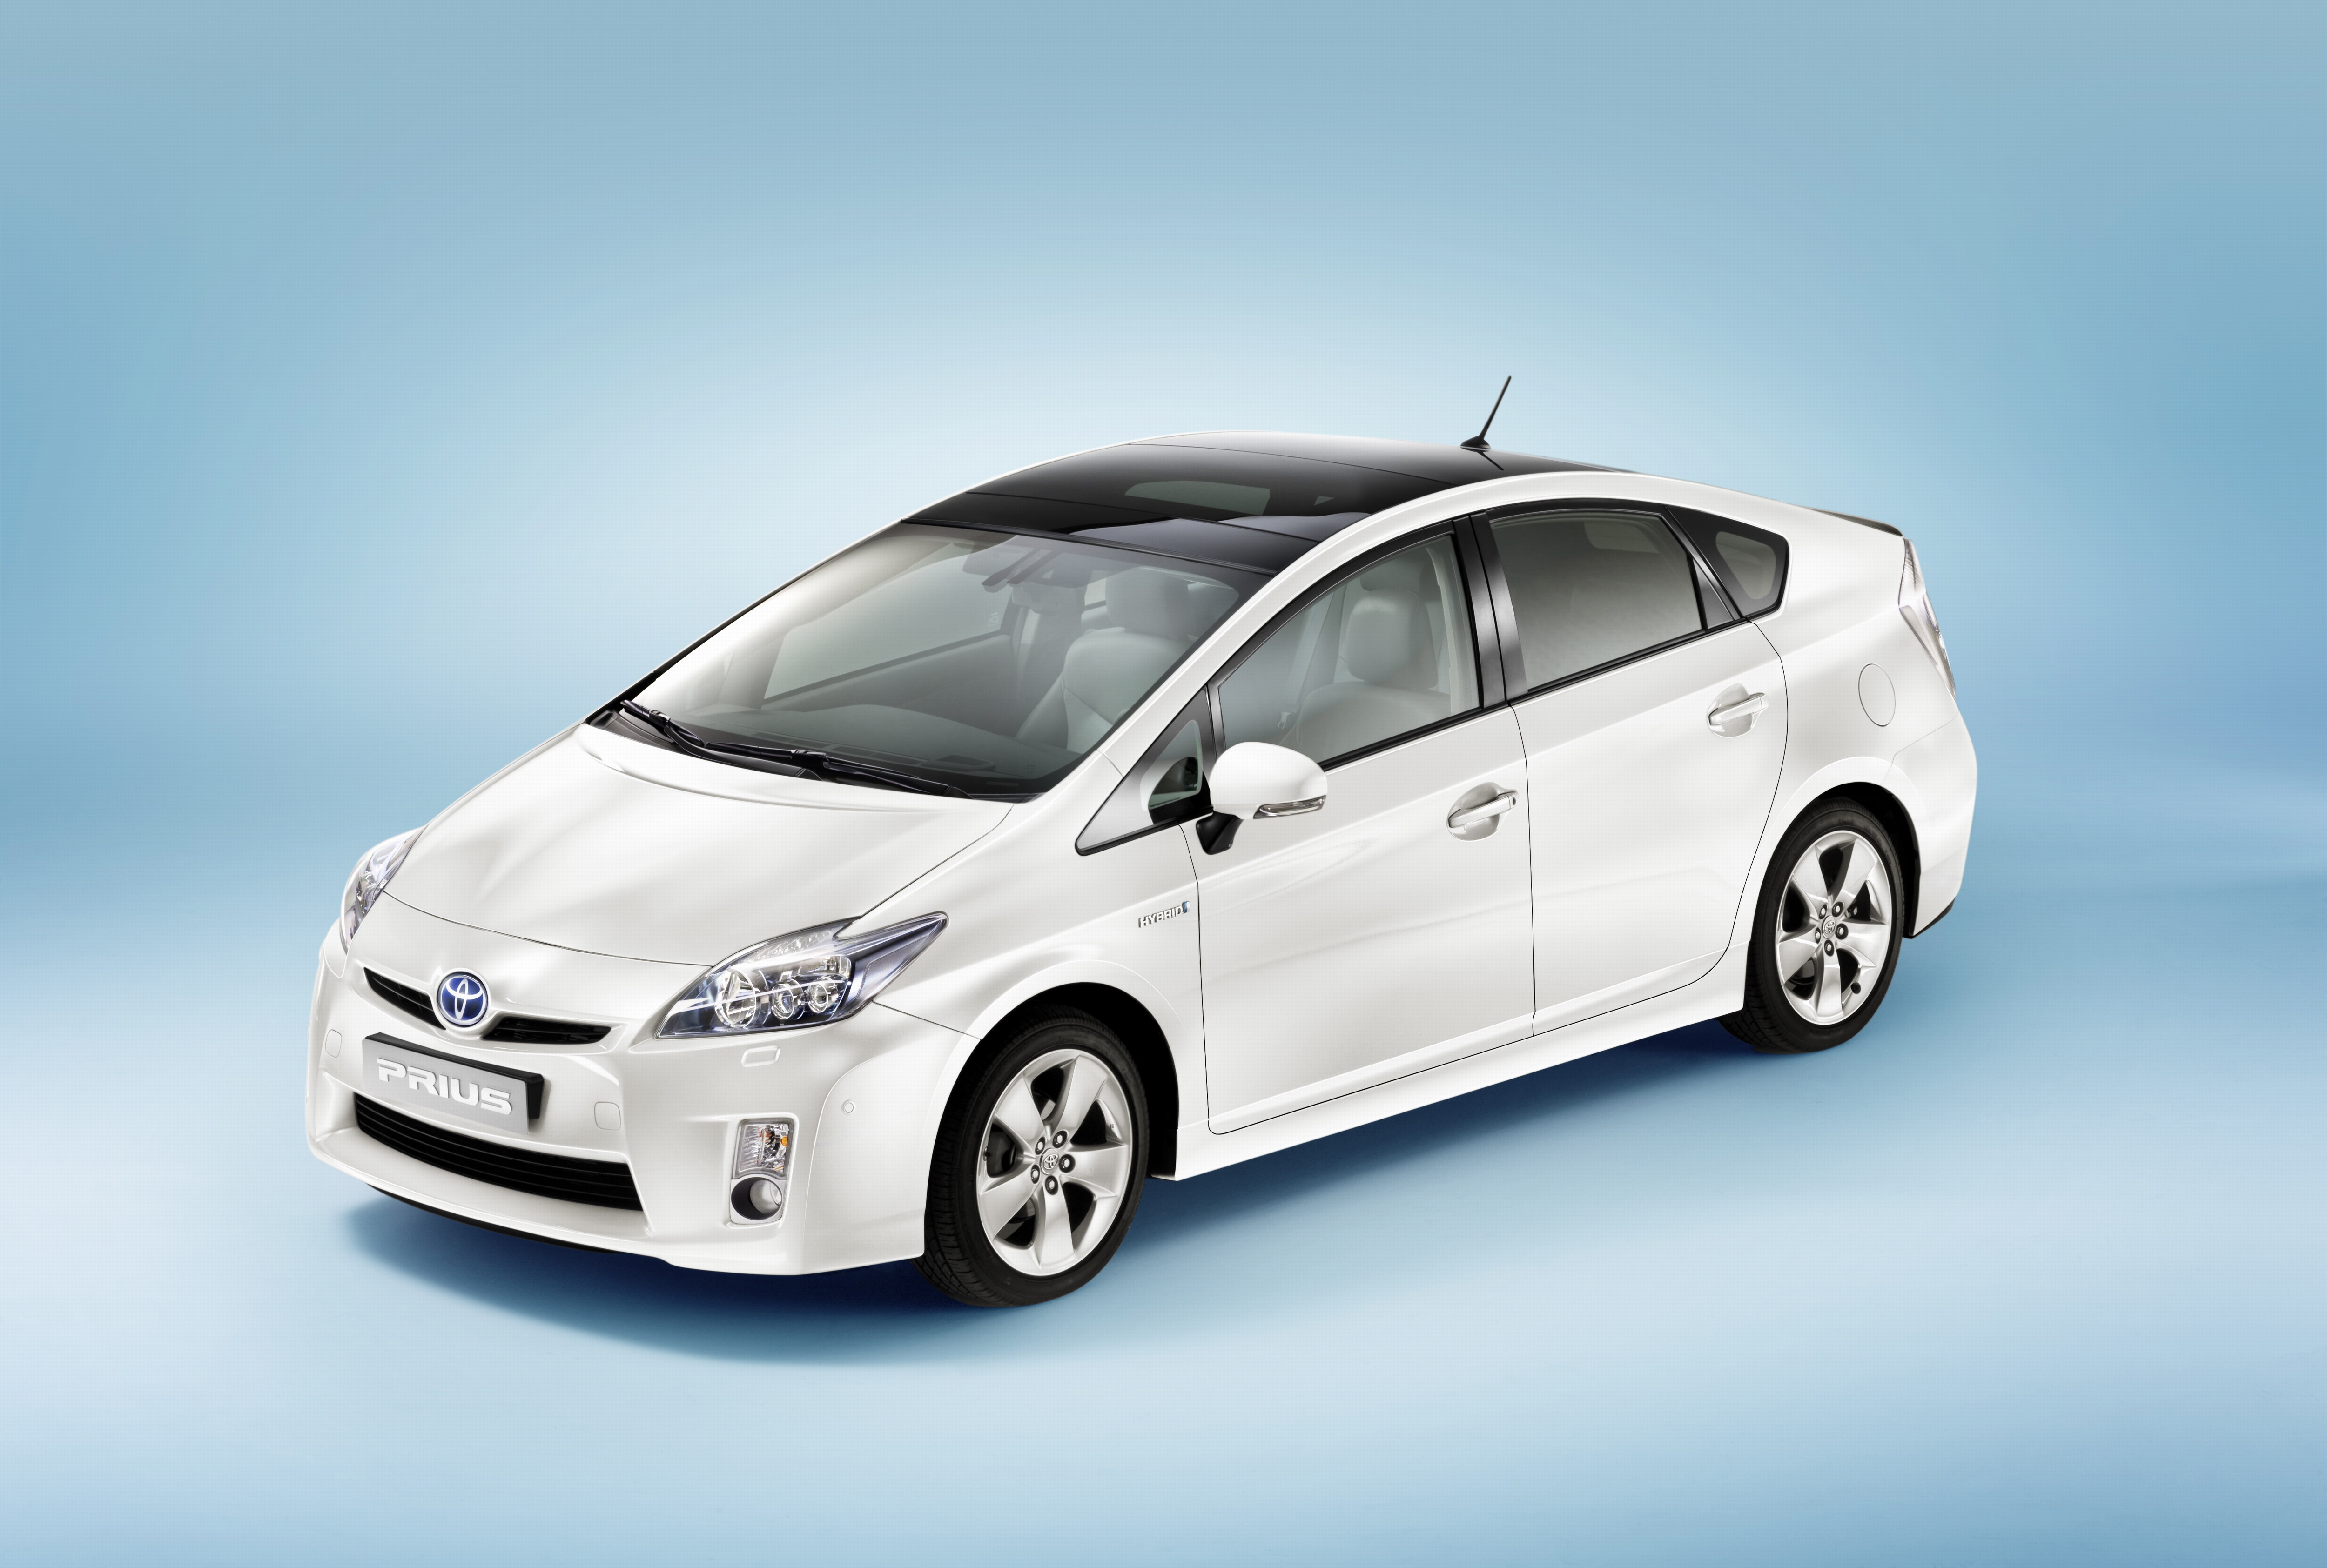 Toyota Prius Wallpaper HD Full Pictures